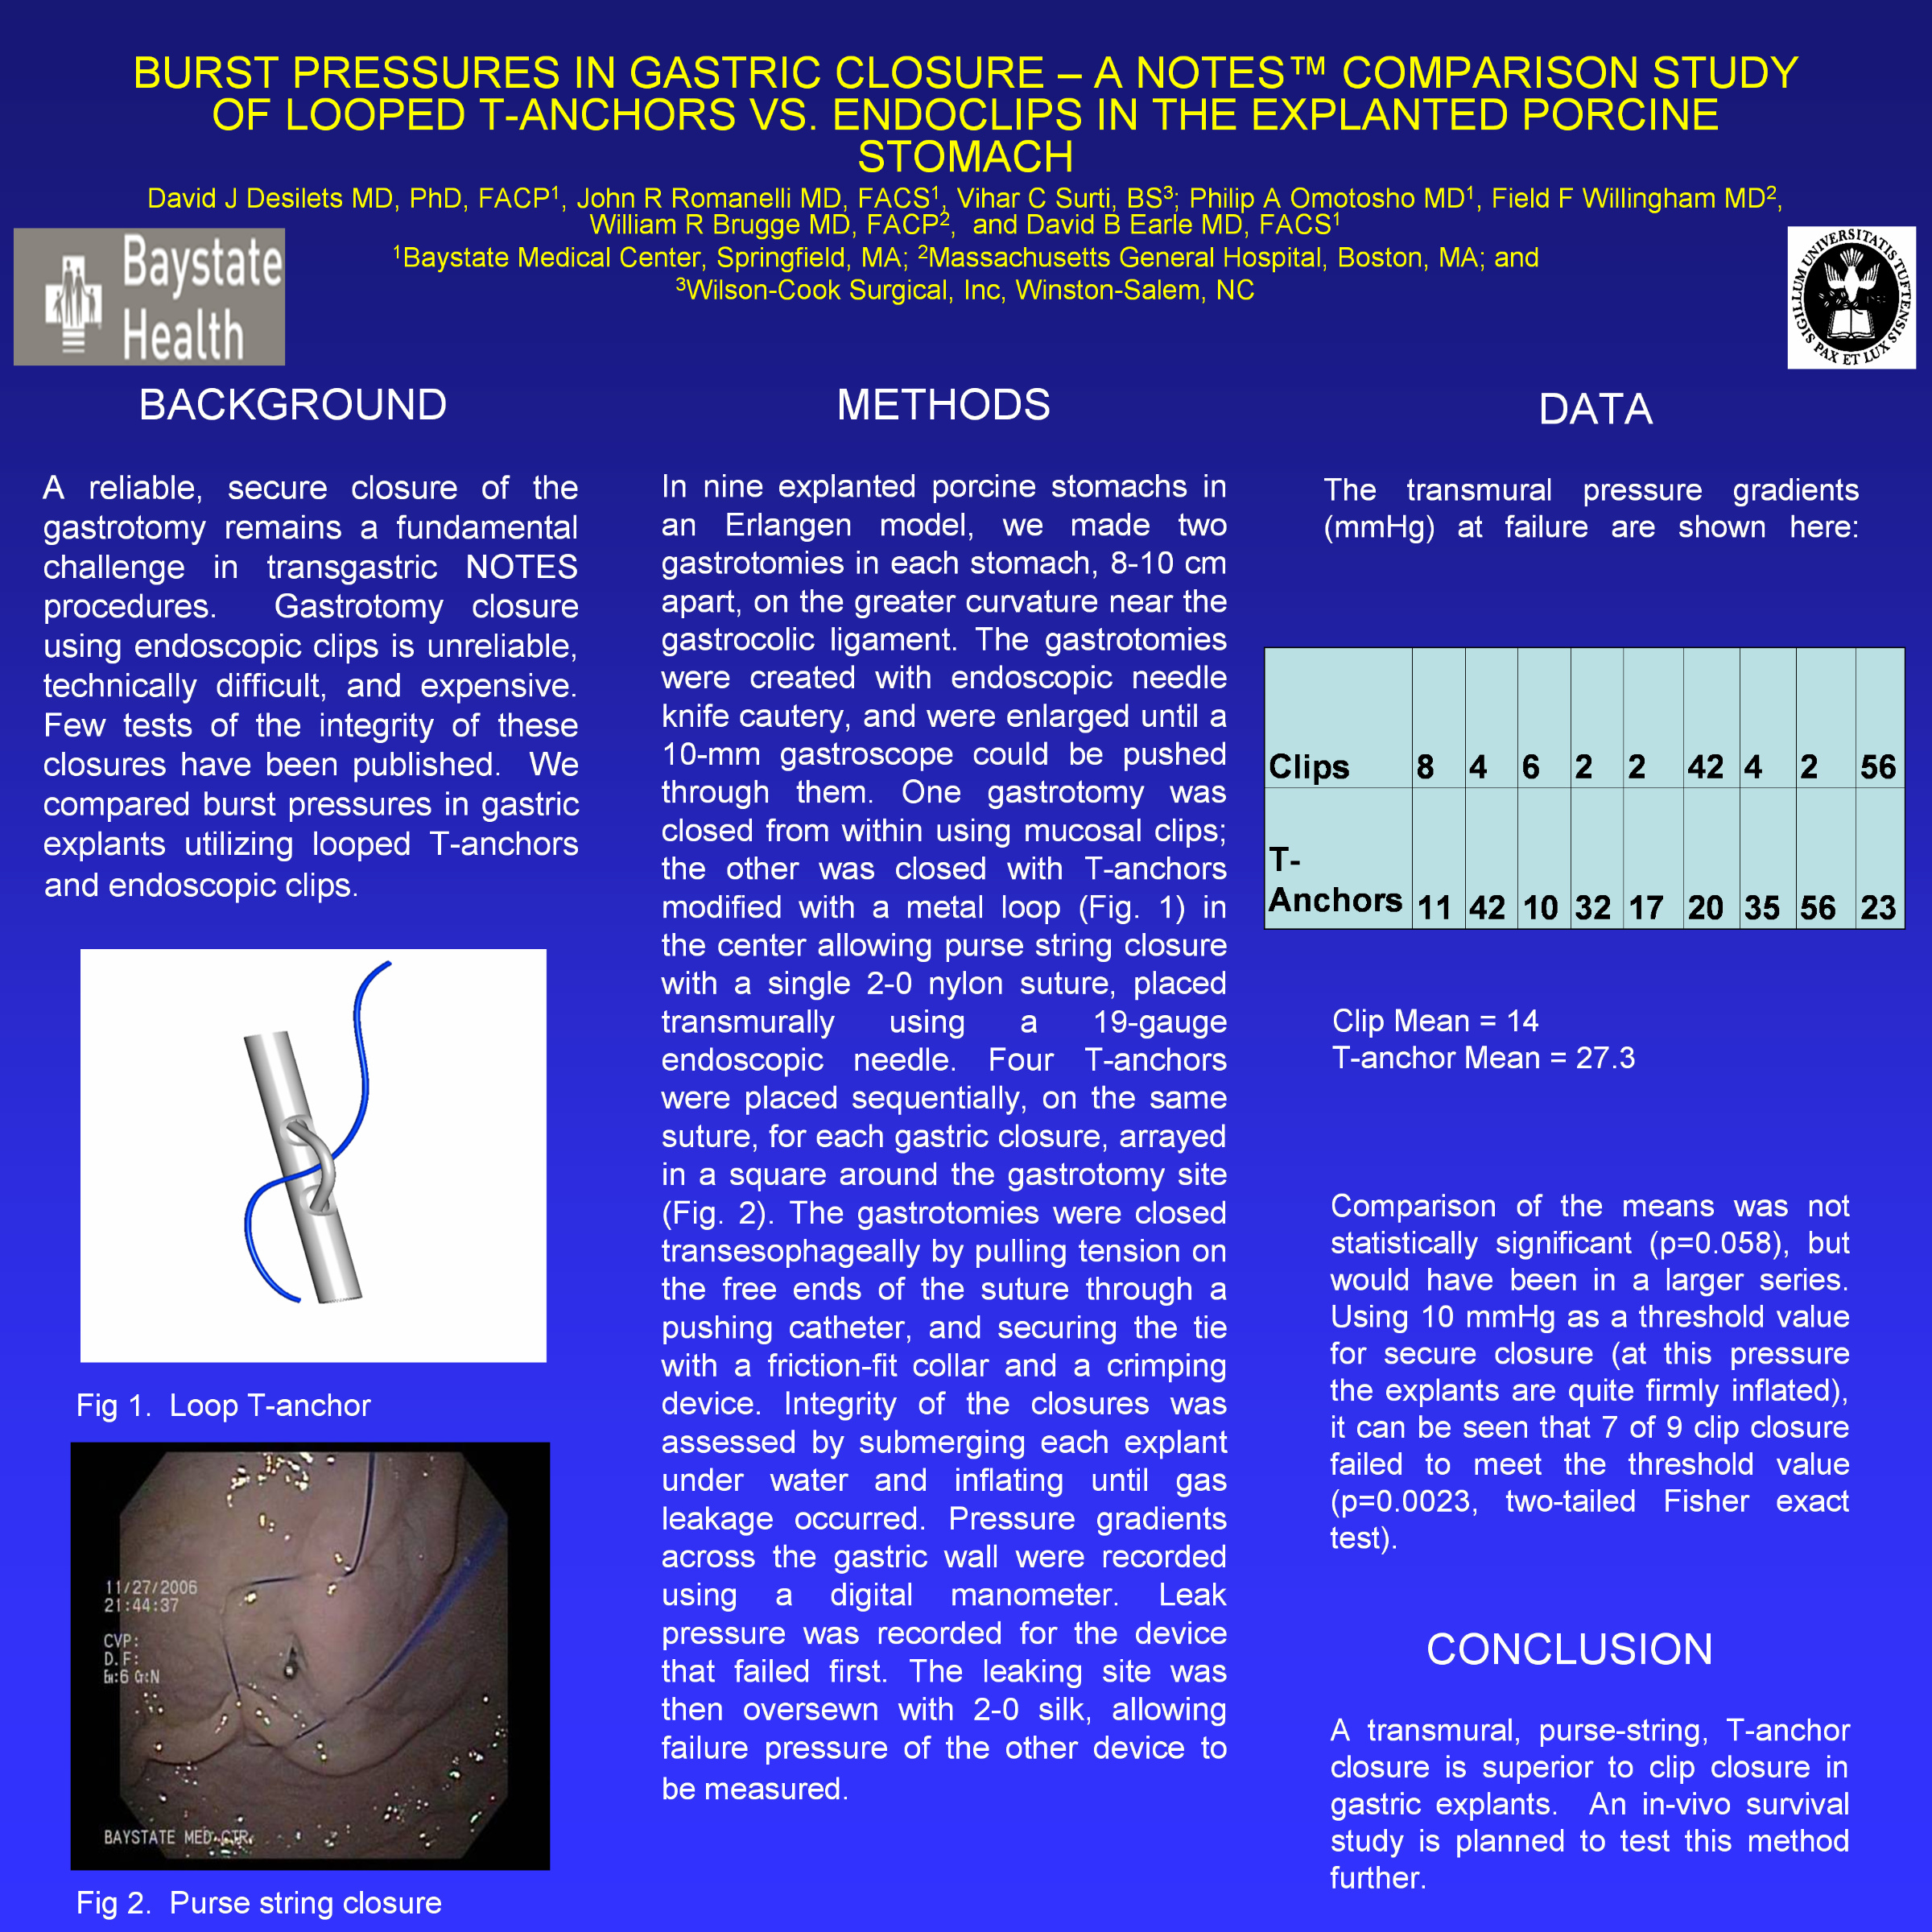 The management of cervical incompetence by purse-string suture